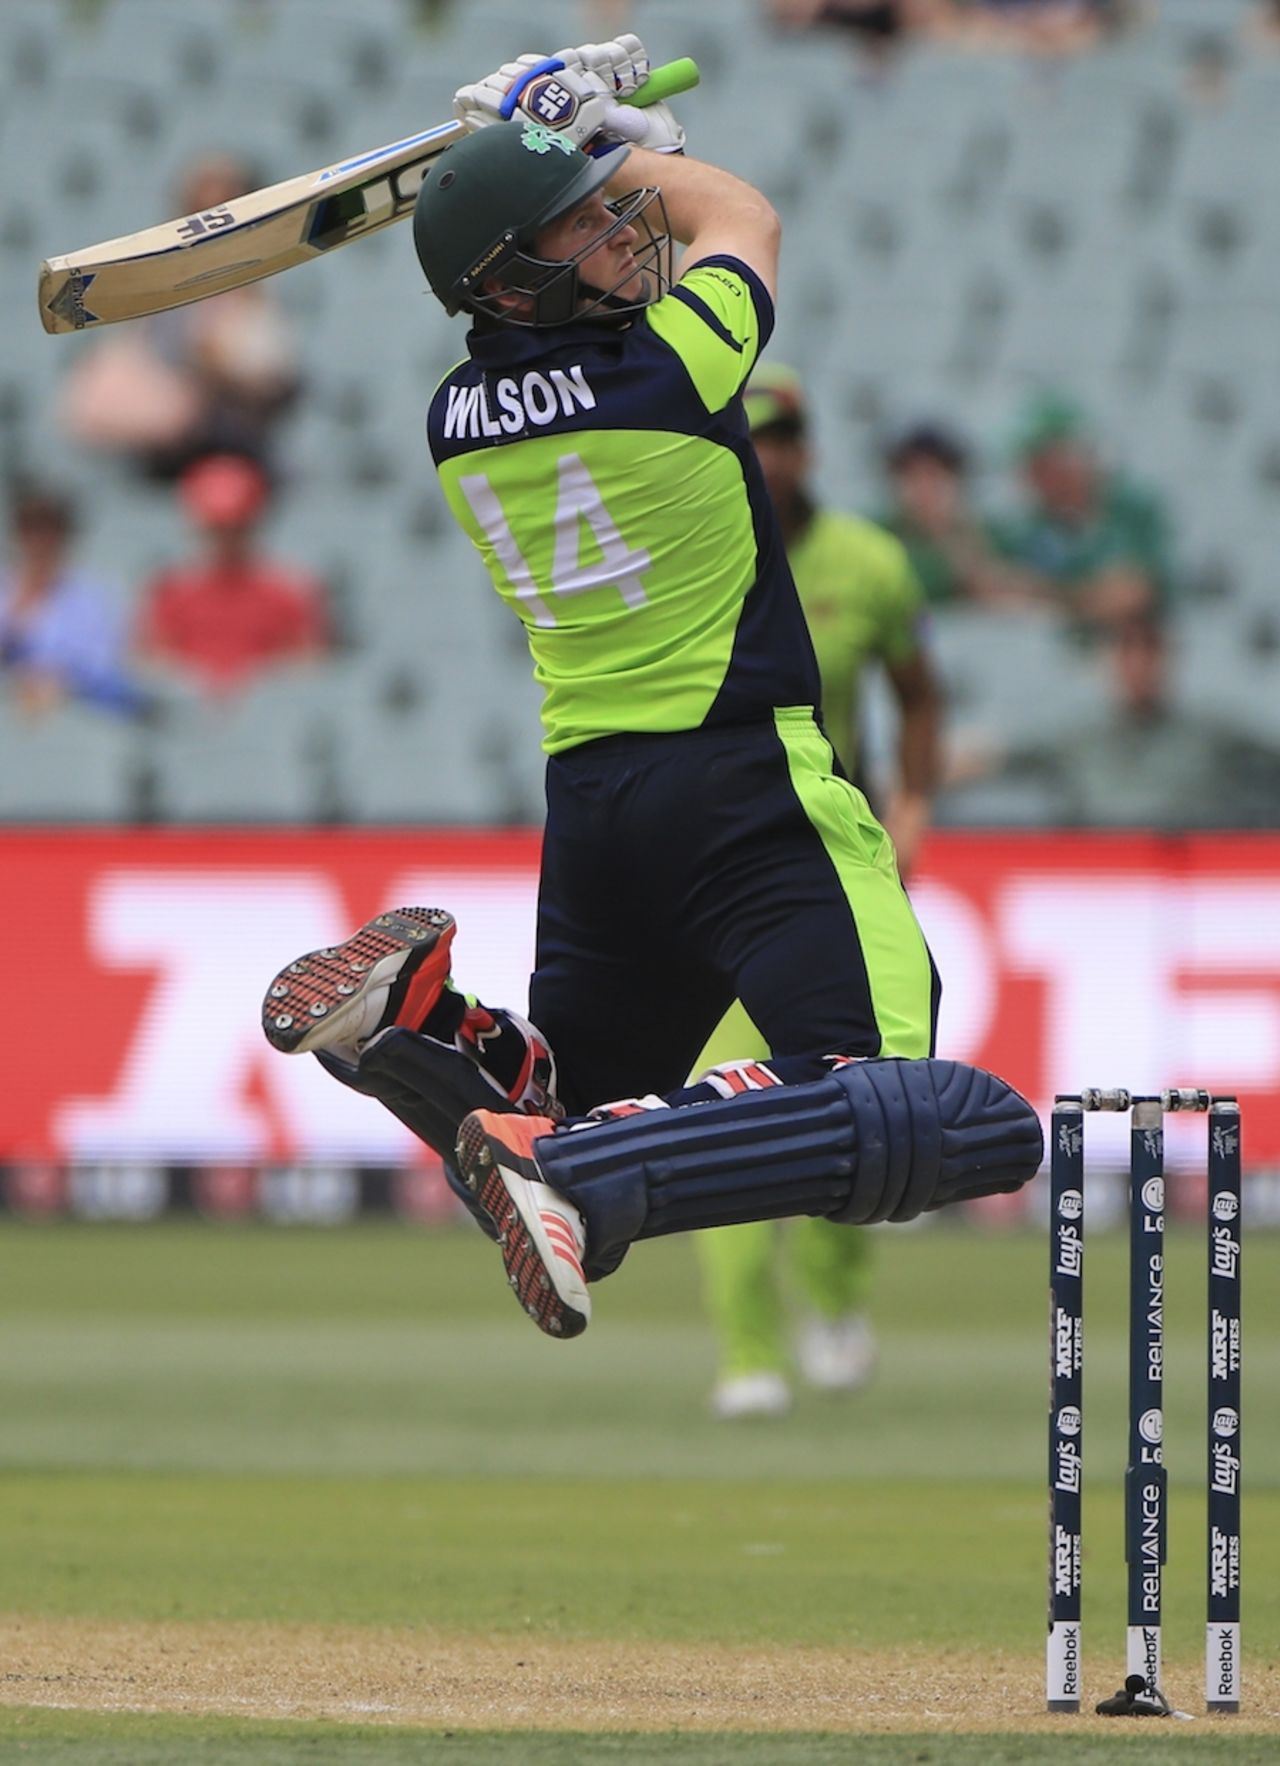 Gary Wilson goes air borne, Ireland v Pakistan, World Cup 2015, Group B, Adelaide, March 15, 2015